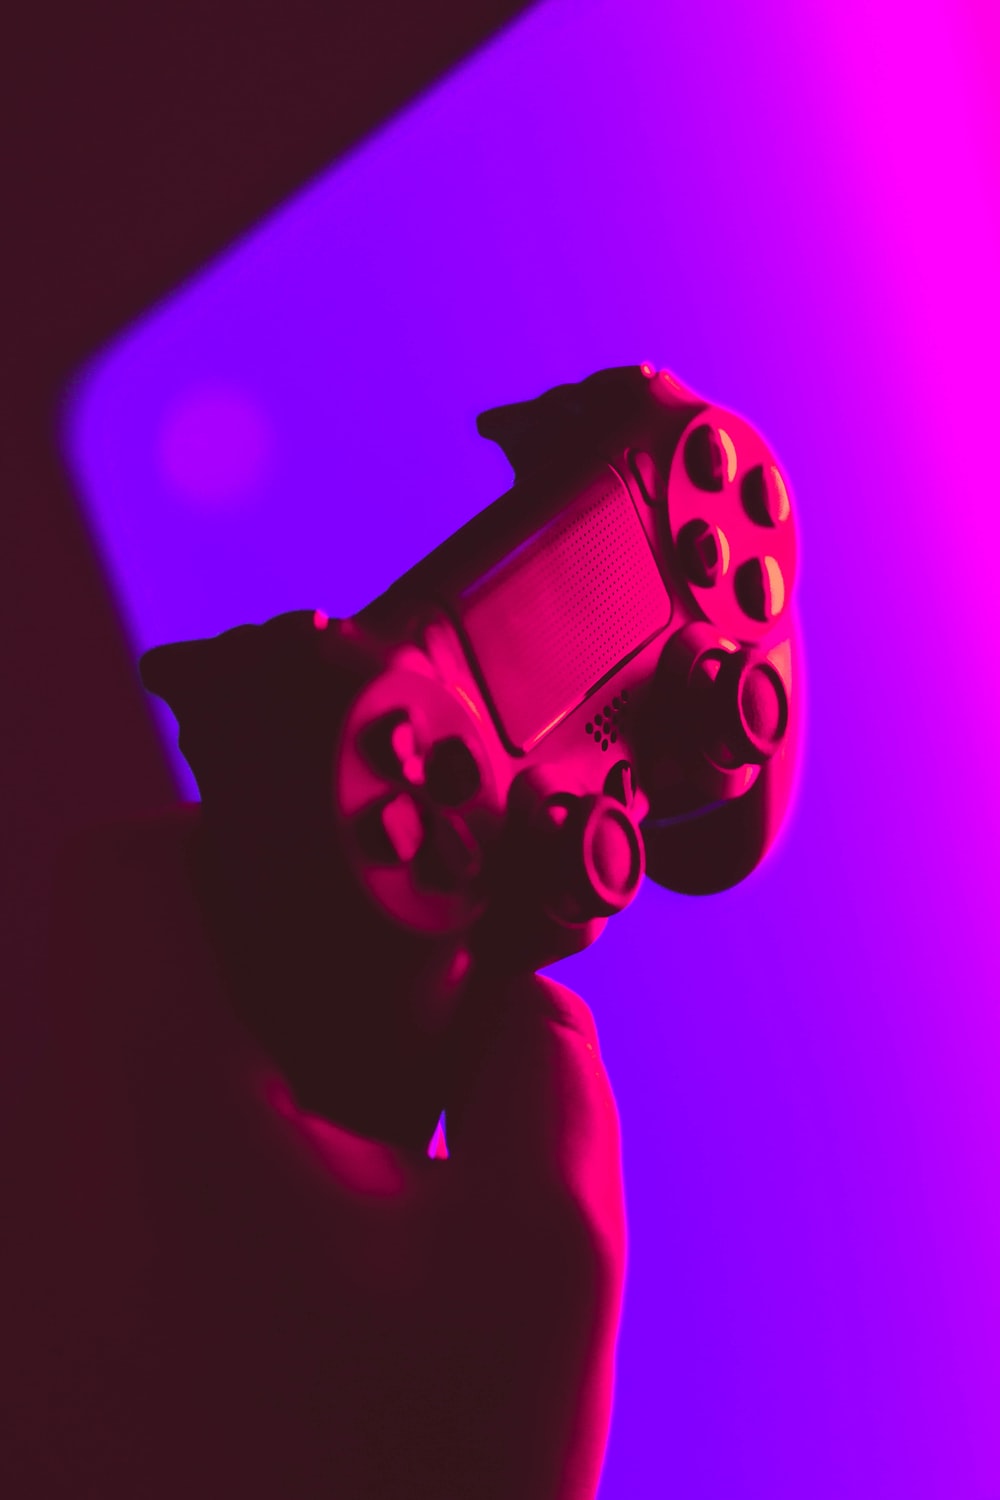 Gaming Picture [HQ]. Download Free Image